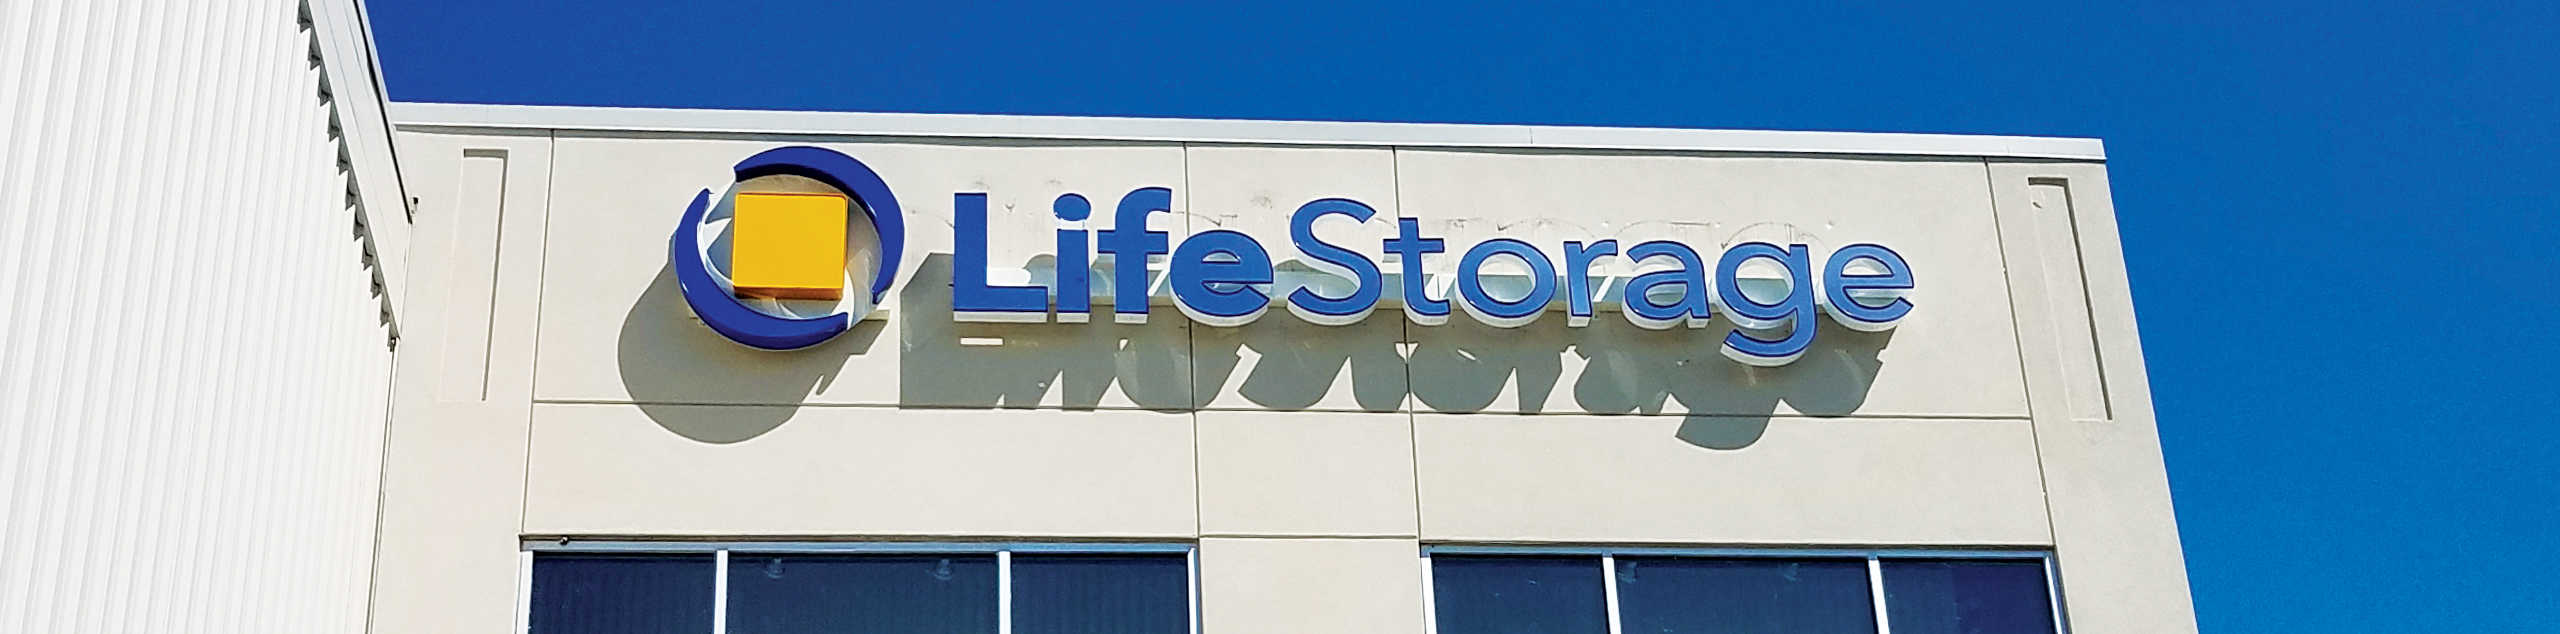 Life Storage sign on the side of a building